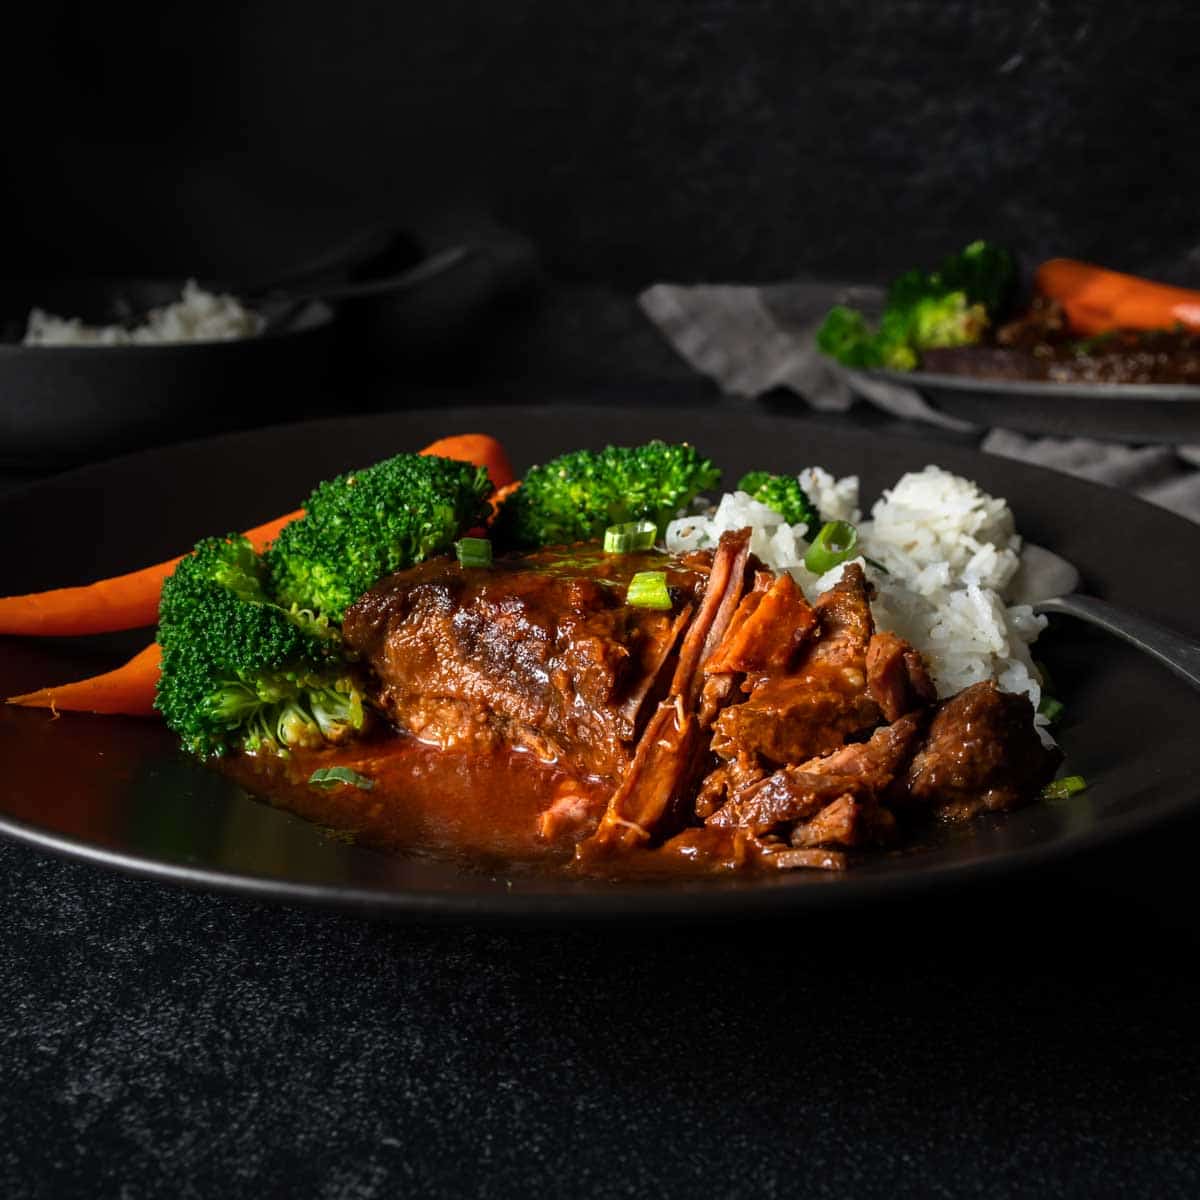 A plate with a hearty portion of braised Galbi style beef short ribs and rice